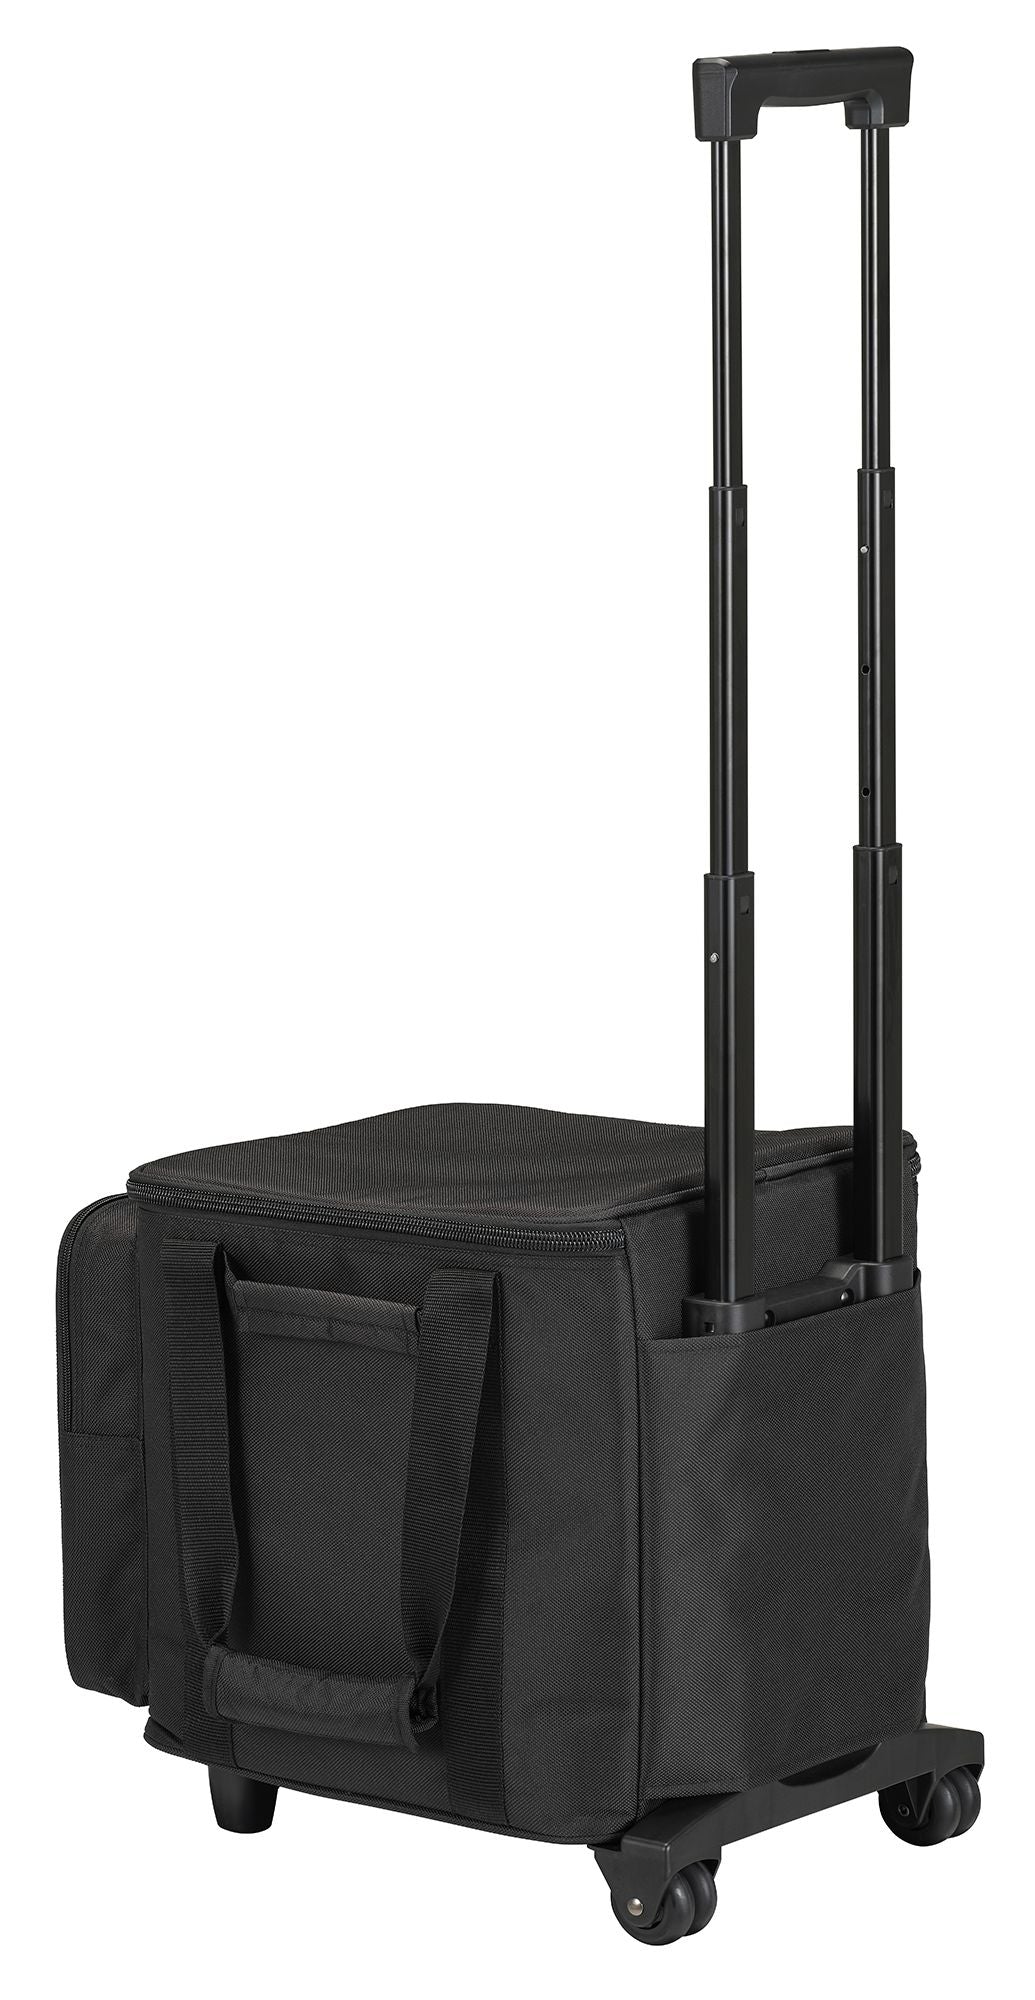 YAMAHA CASE-STP200 Carrying case for STAGEPAS 200